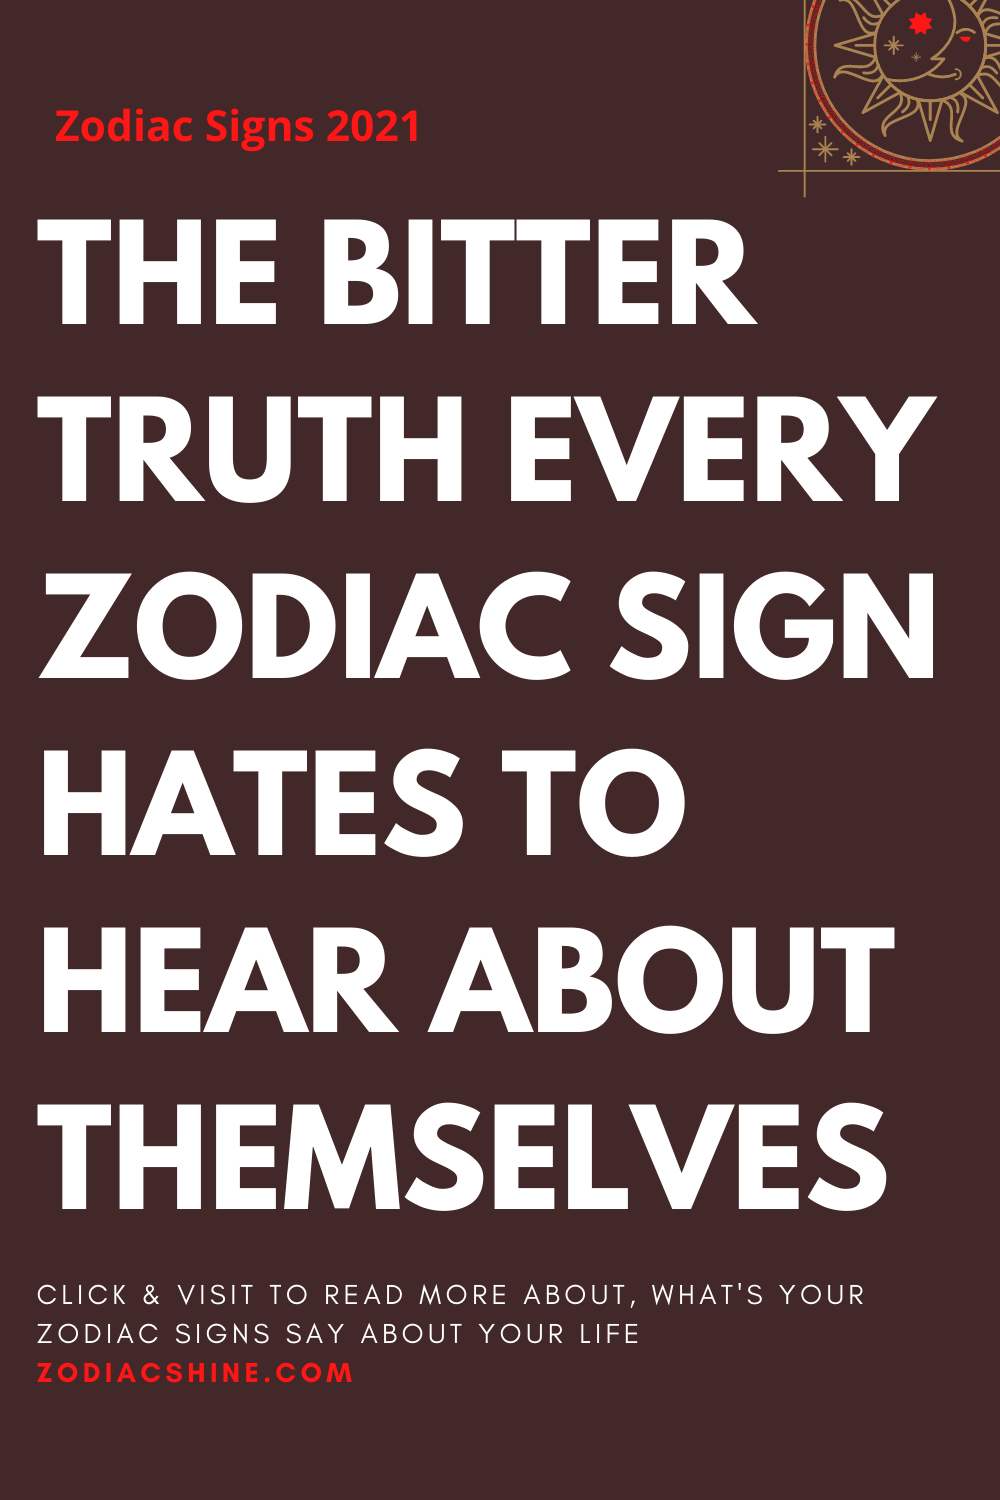 THE BITTER TRUTH EVERY ZODIAC SIGN HATES TO HEAR ABOUT THEMSELVES